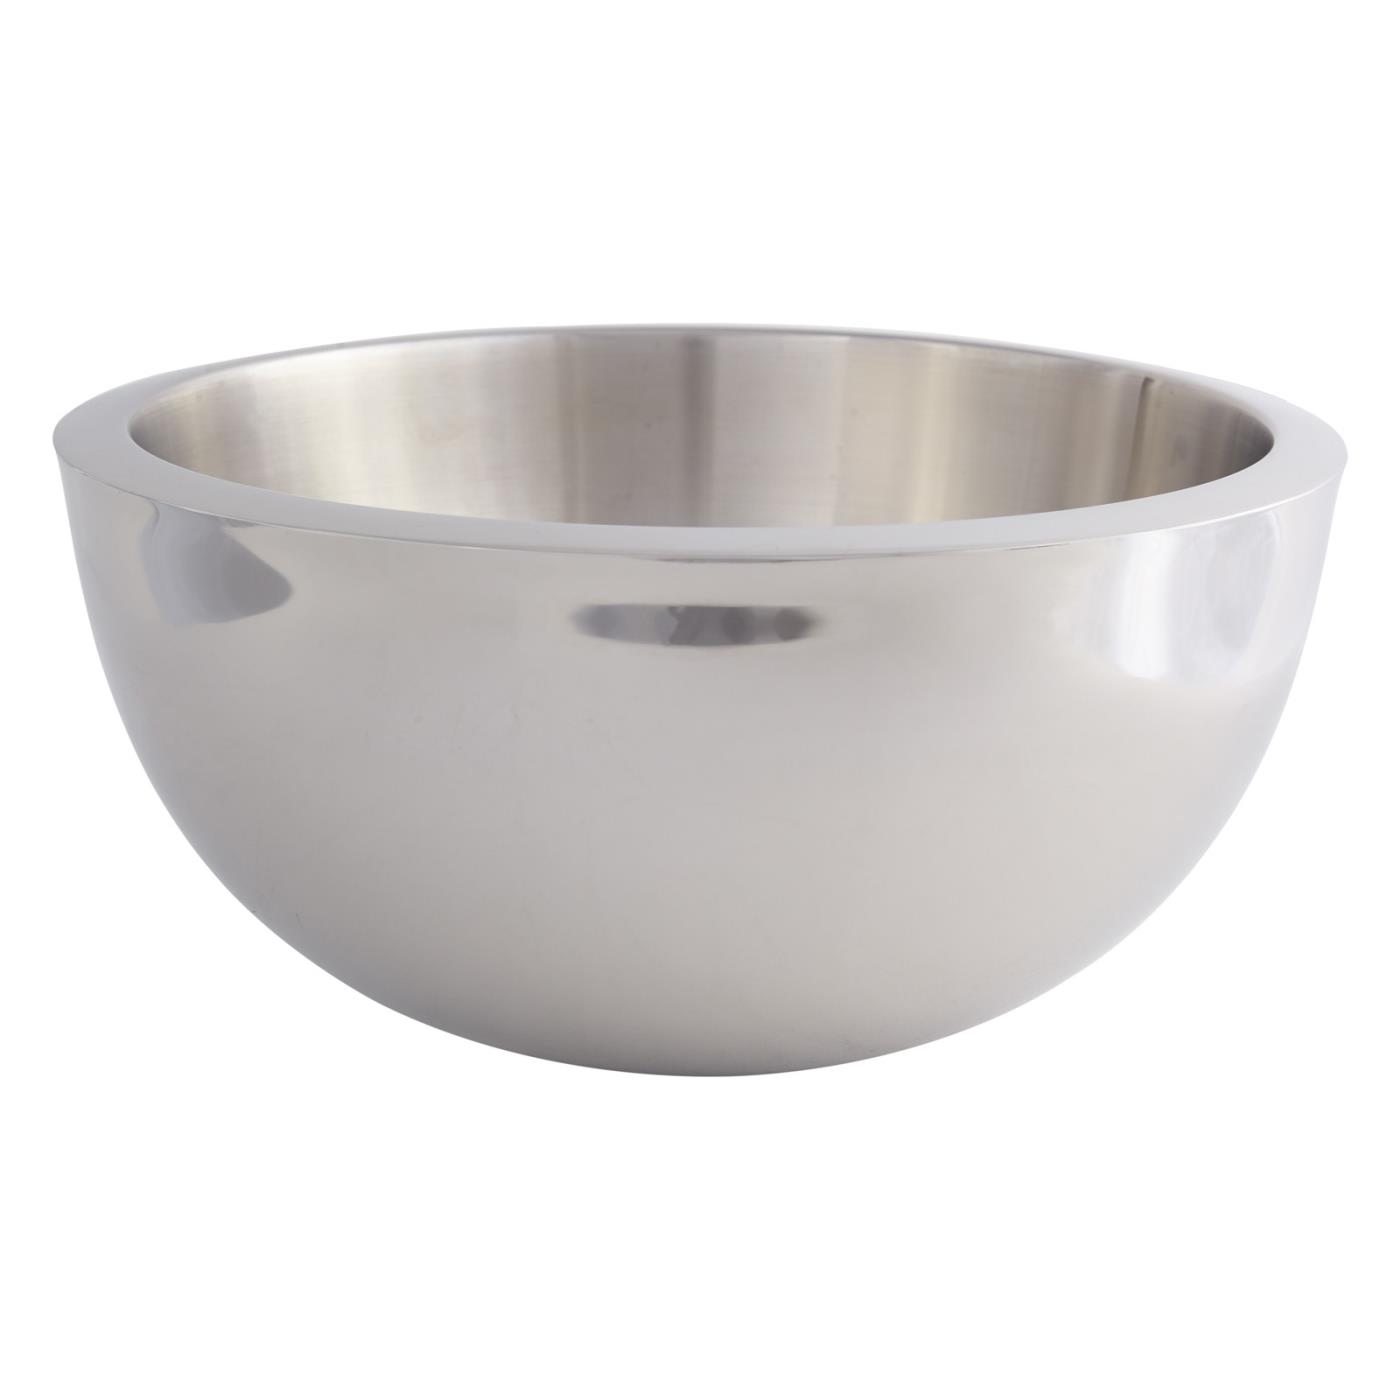 Stainless Steel Mod Bowl - 13"